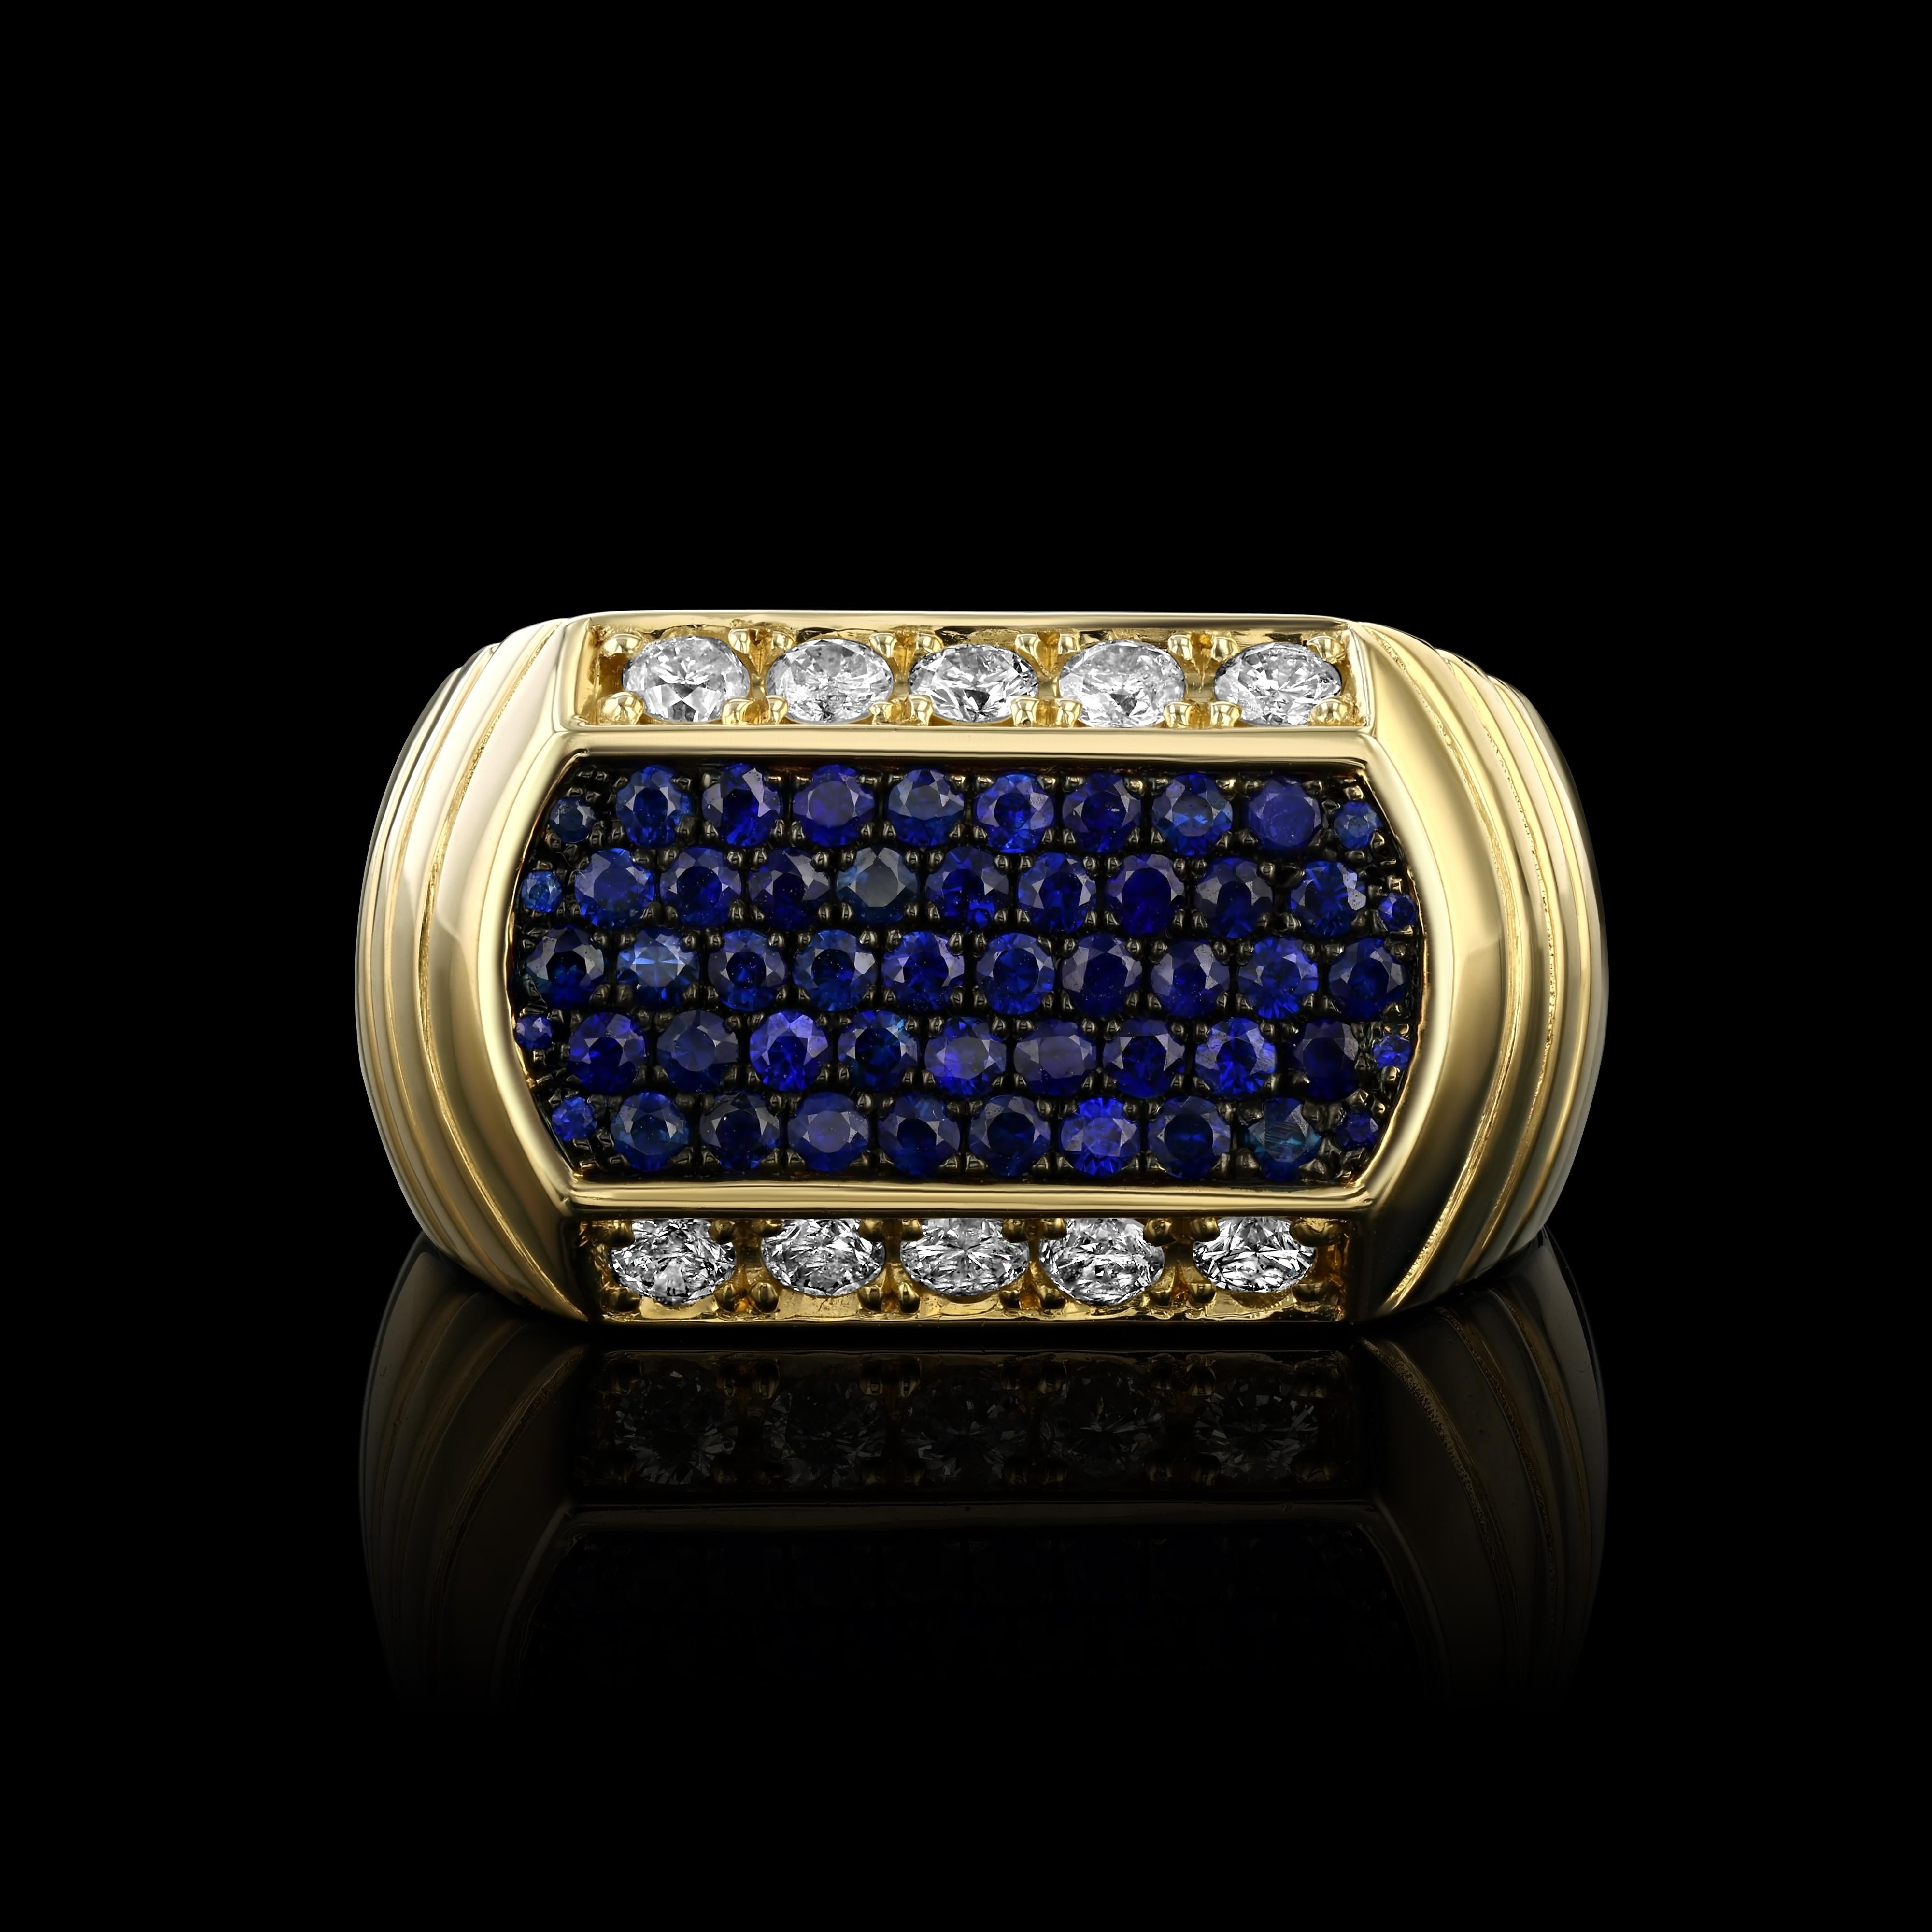 Contemporary House of RAVN, 14k Gold Unisex Art Deco Signet Ring, with Diamonds and Sapphires For Sale